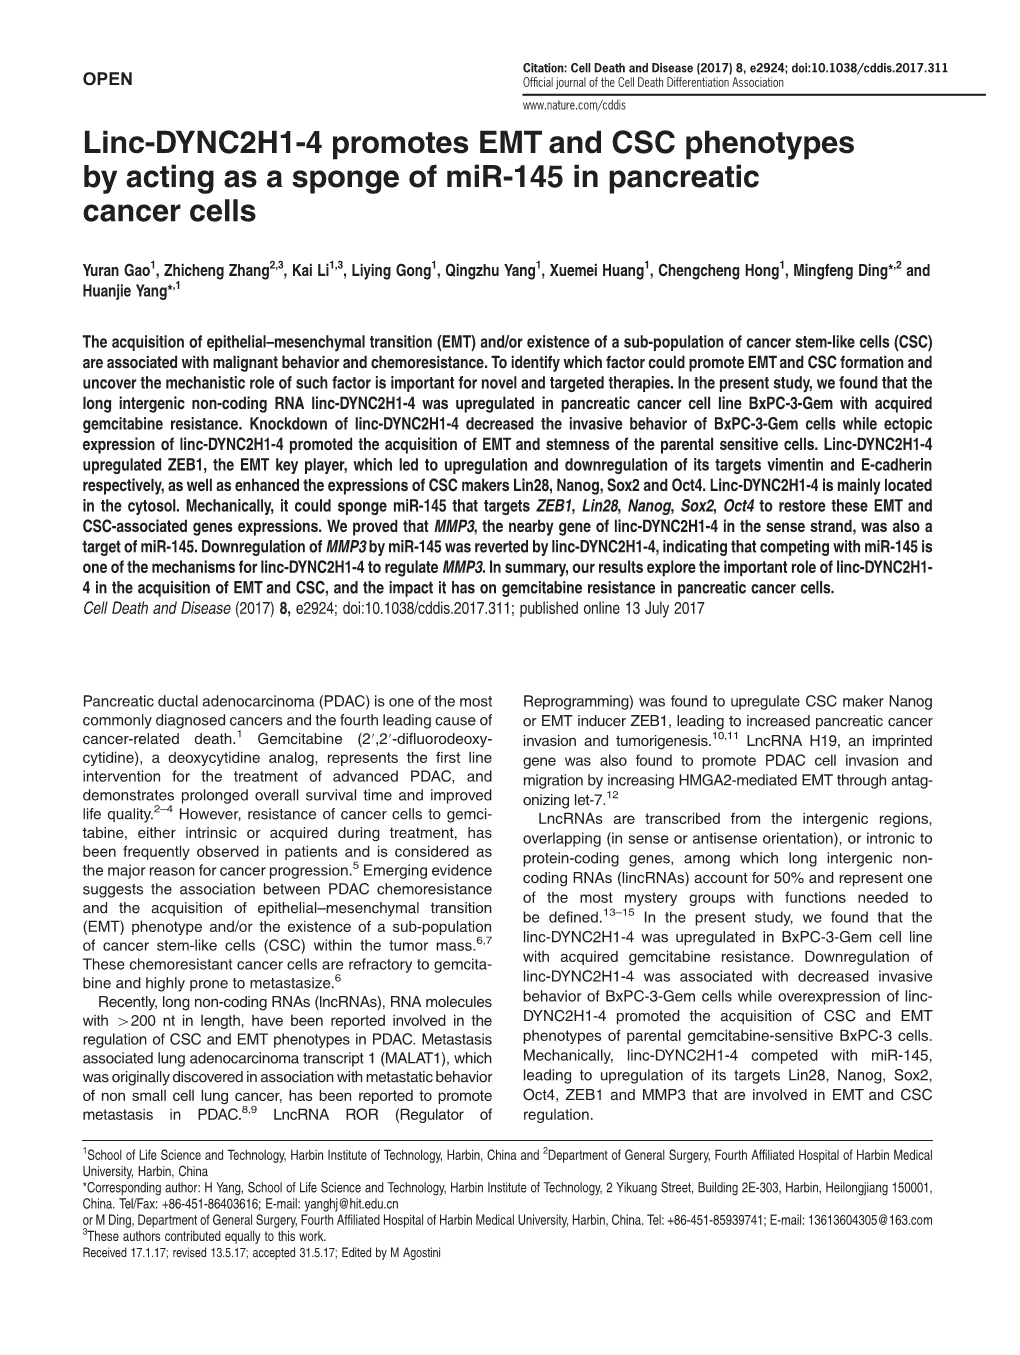 Linc-DYNC2H1-4 Promotes EMT and CSC Phenotypes by Acting As a Sponge of Mir-145 in Pancreatic Cancer Cells